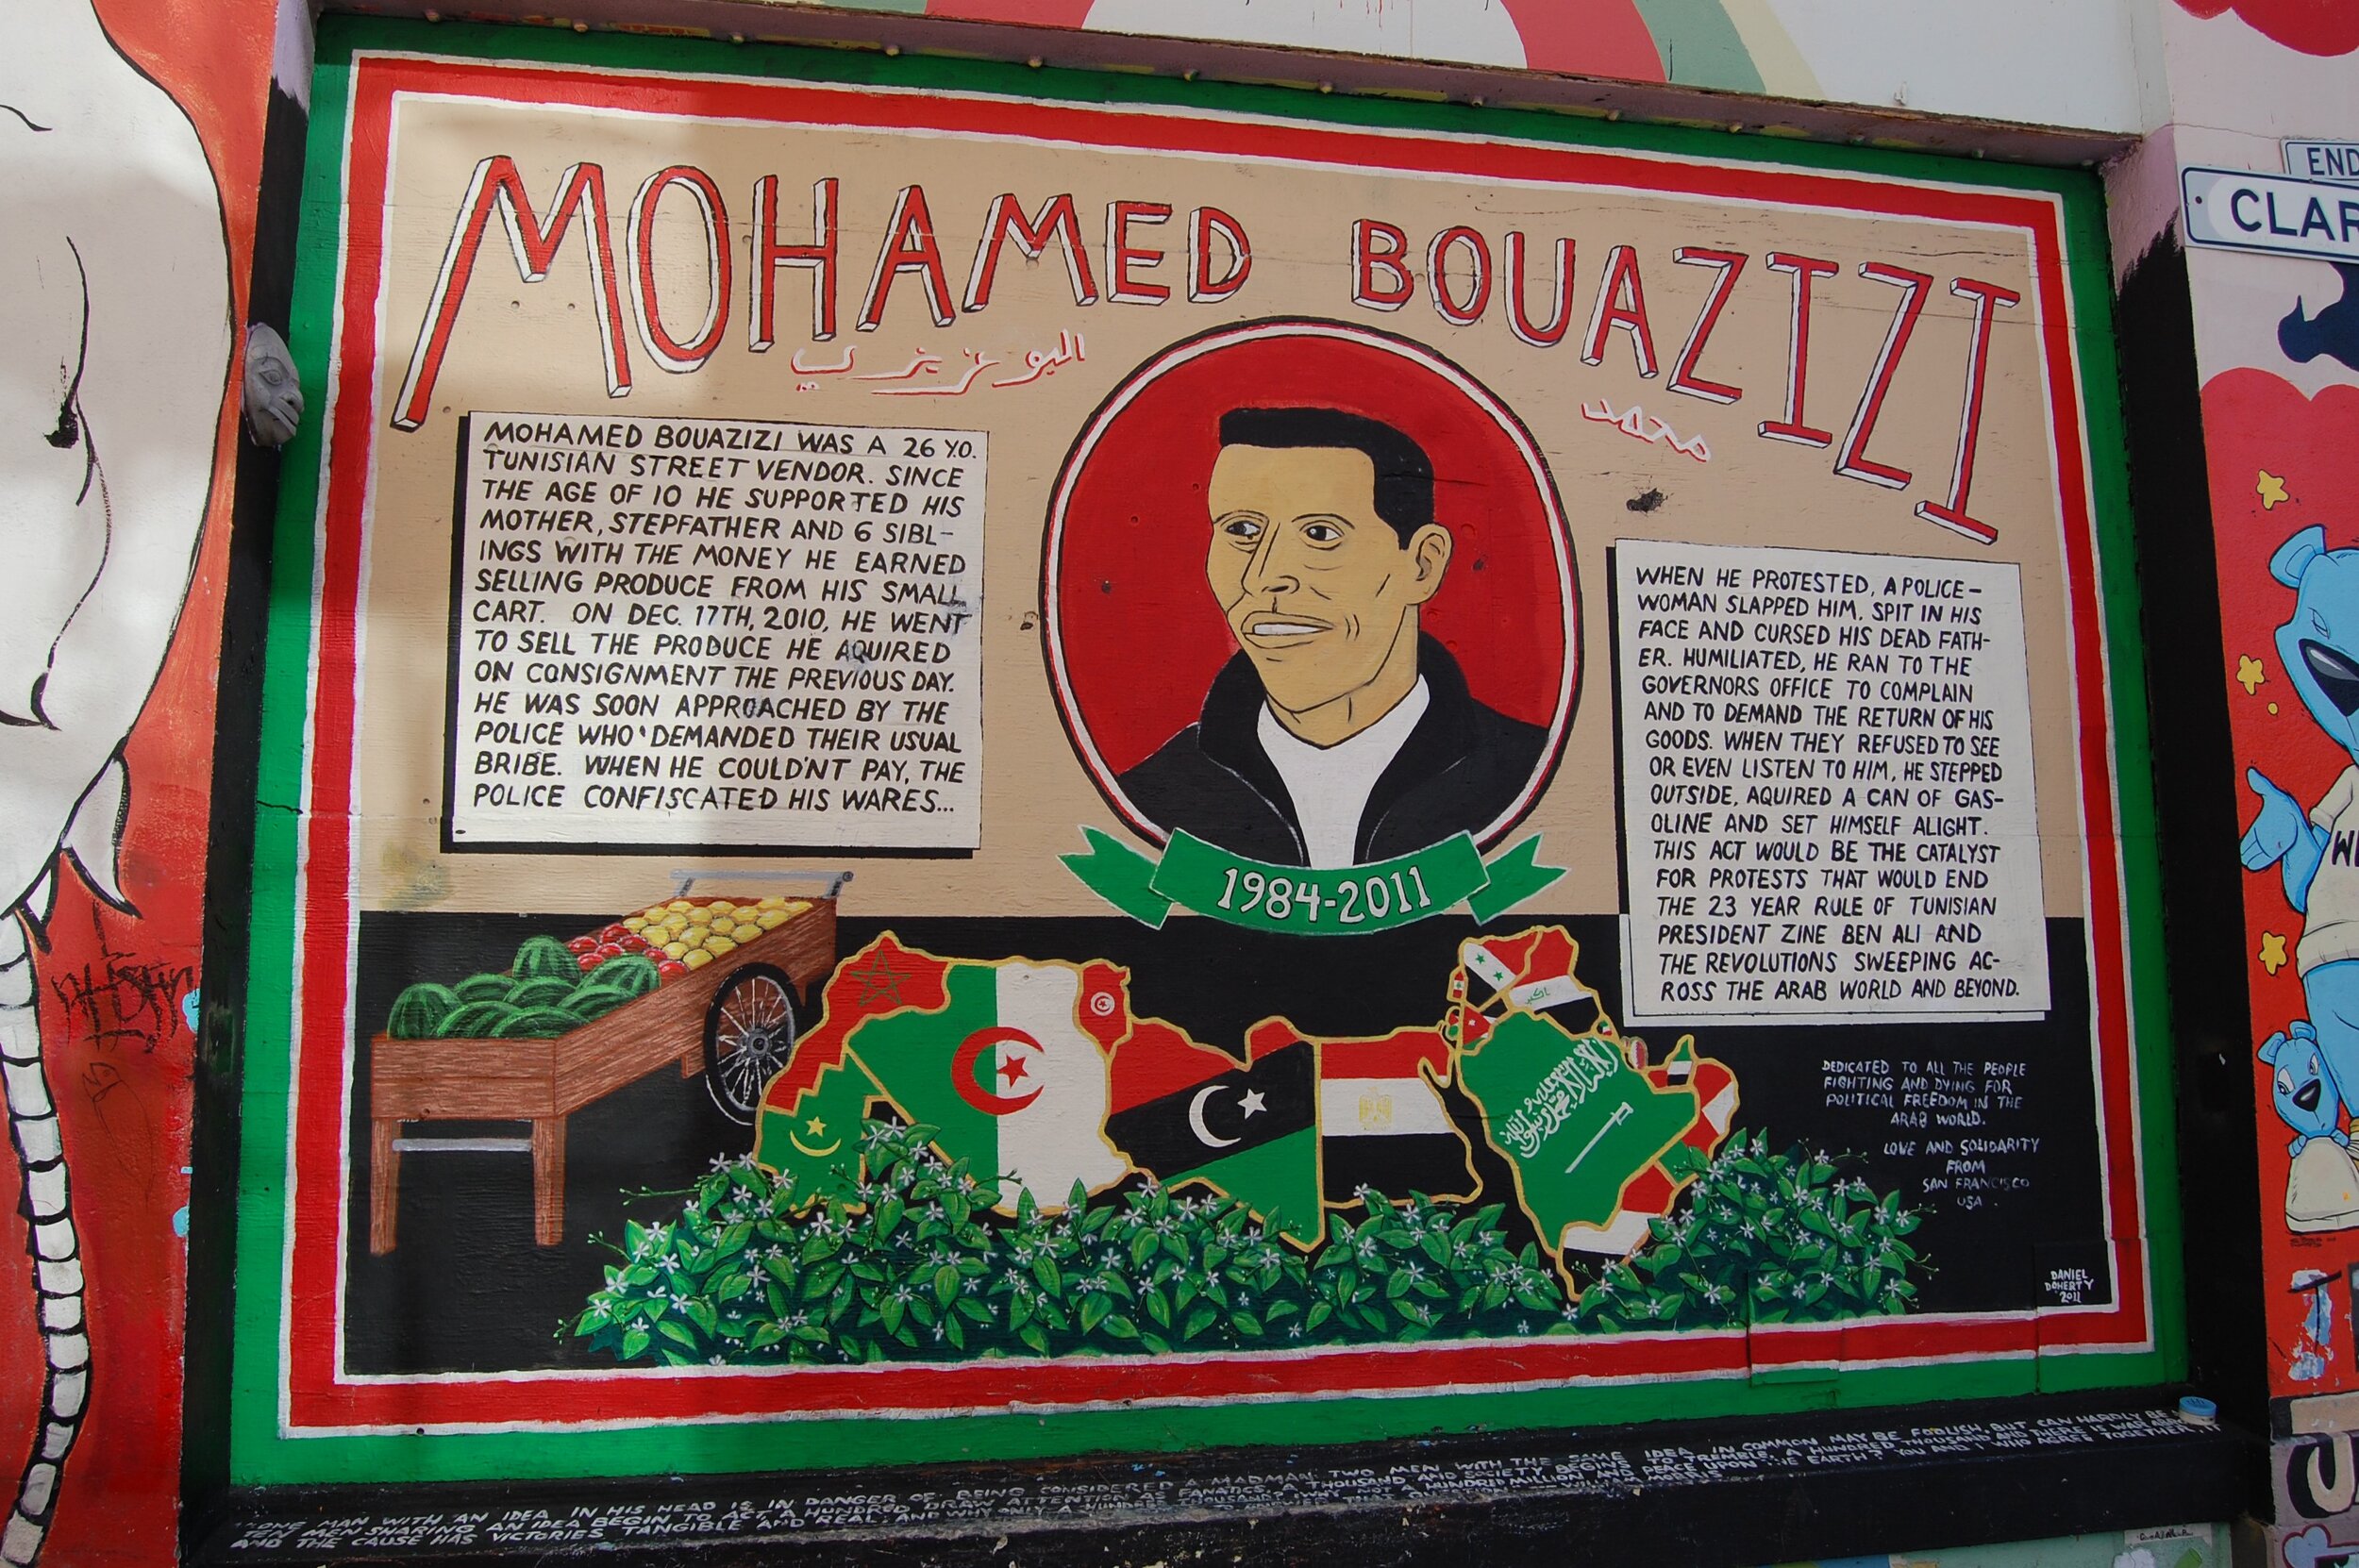 Street vendor Mohamed Bouazizi's self-immolation sparked the Tunisian revolution (Flickr/Far Out Flora)